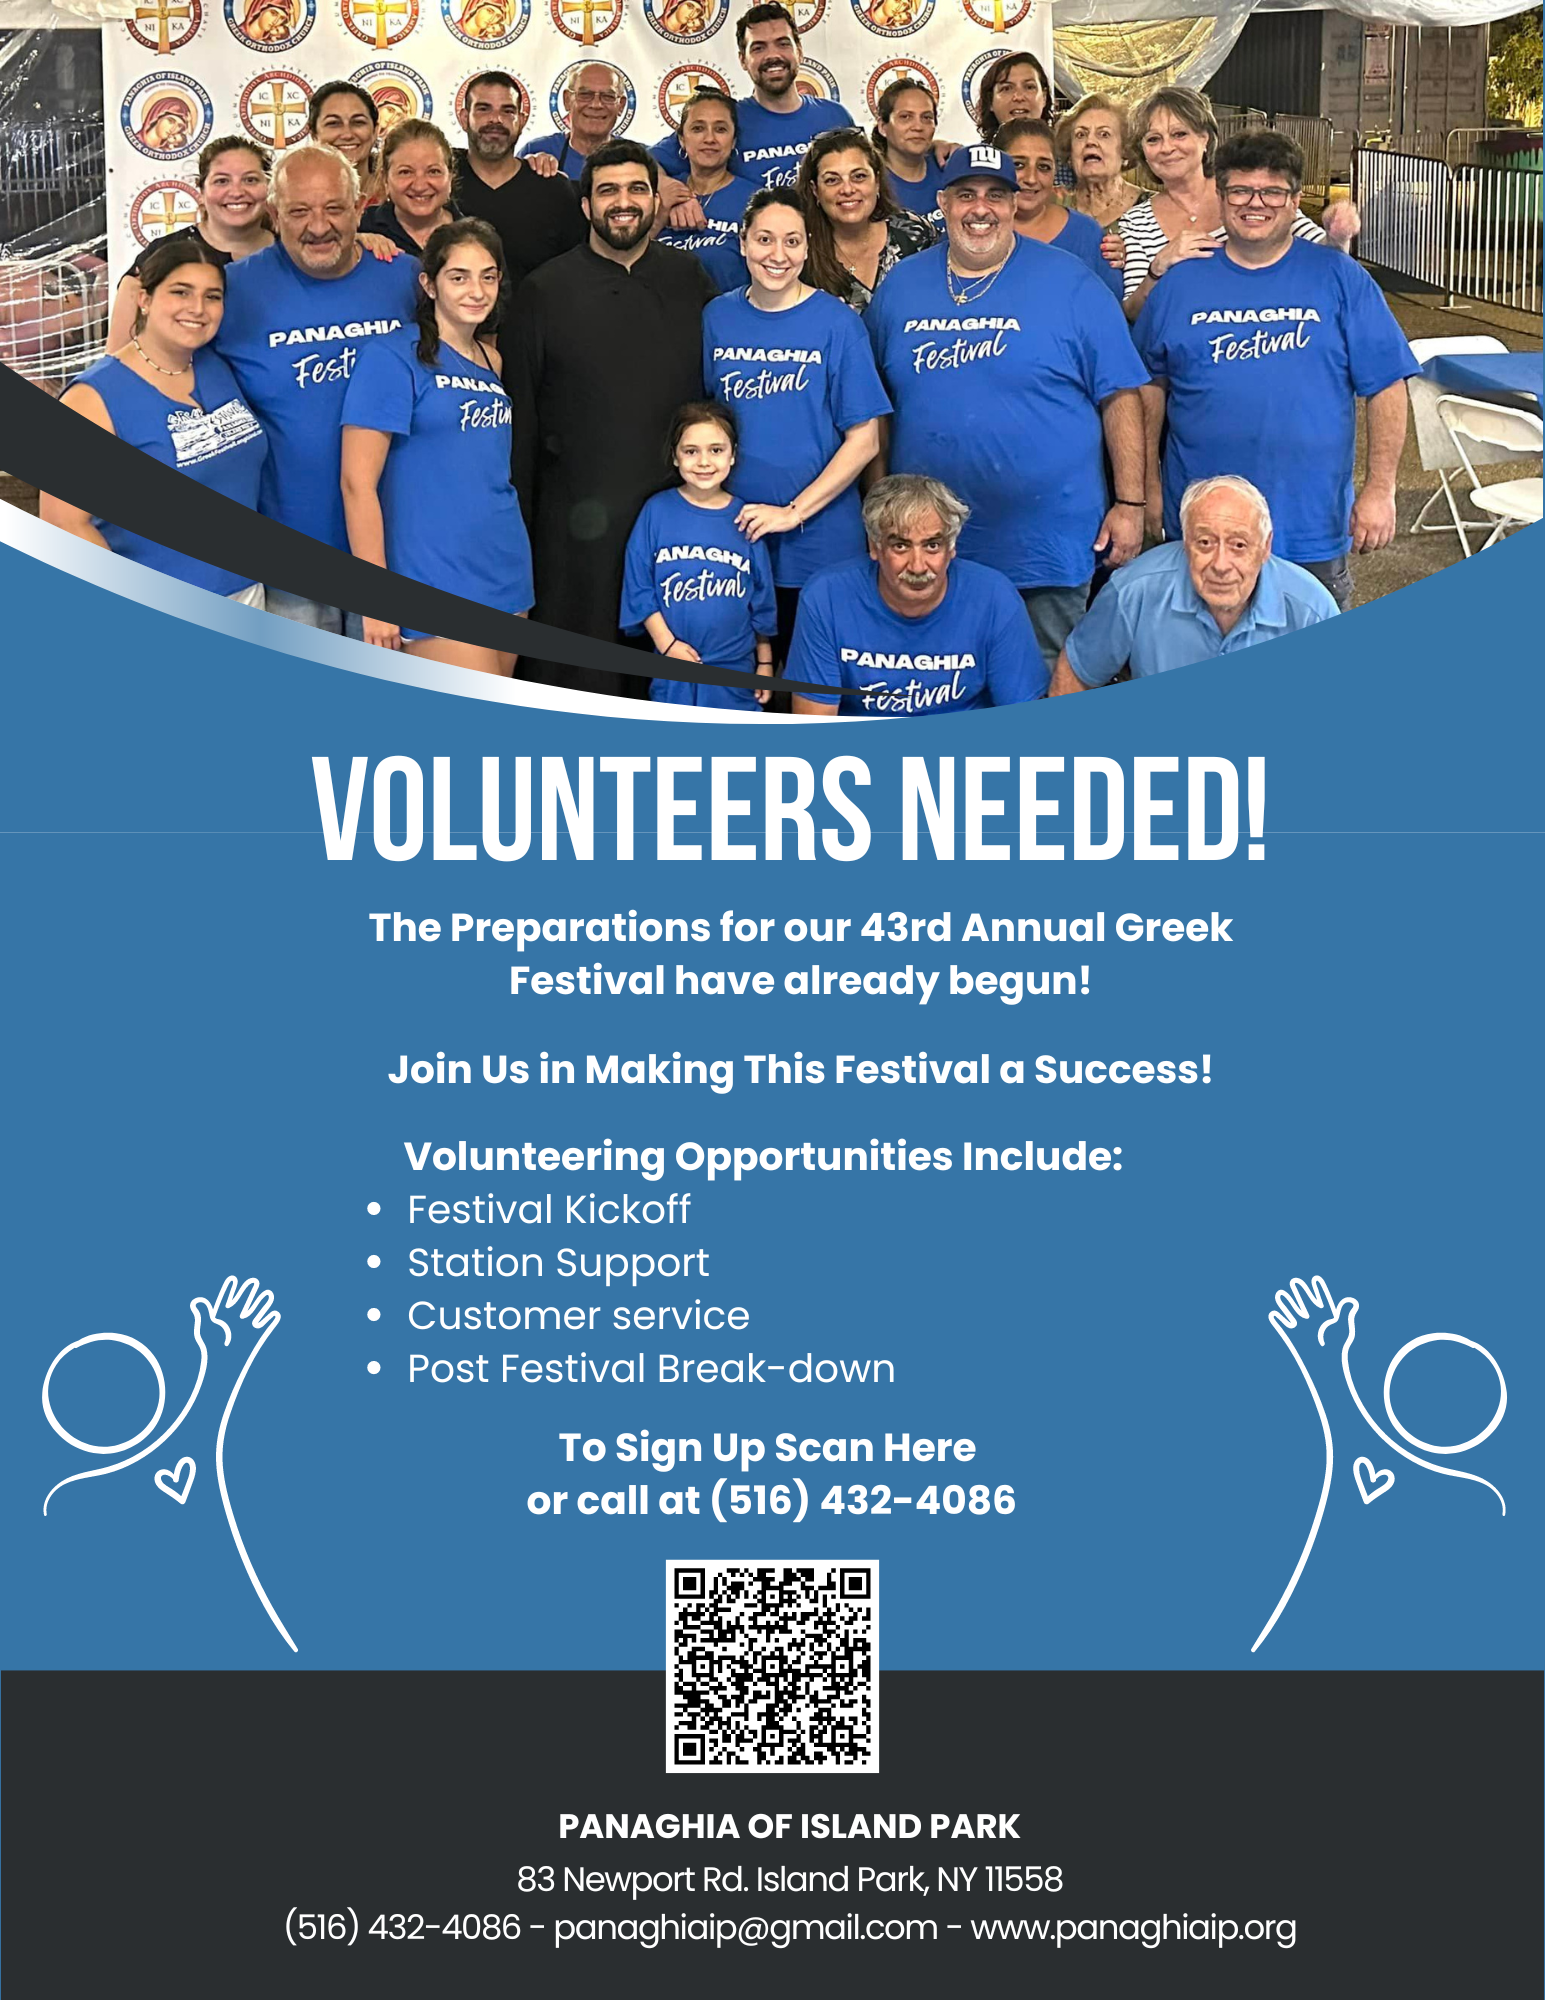 Volunteers Needed for Our 43rd Annual Greek Festival!